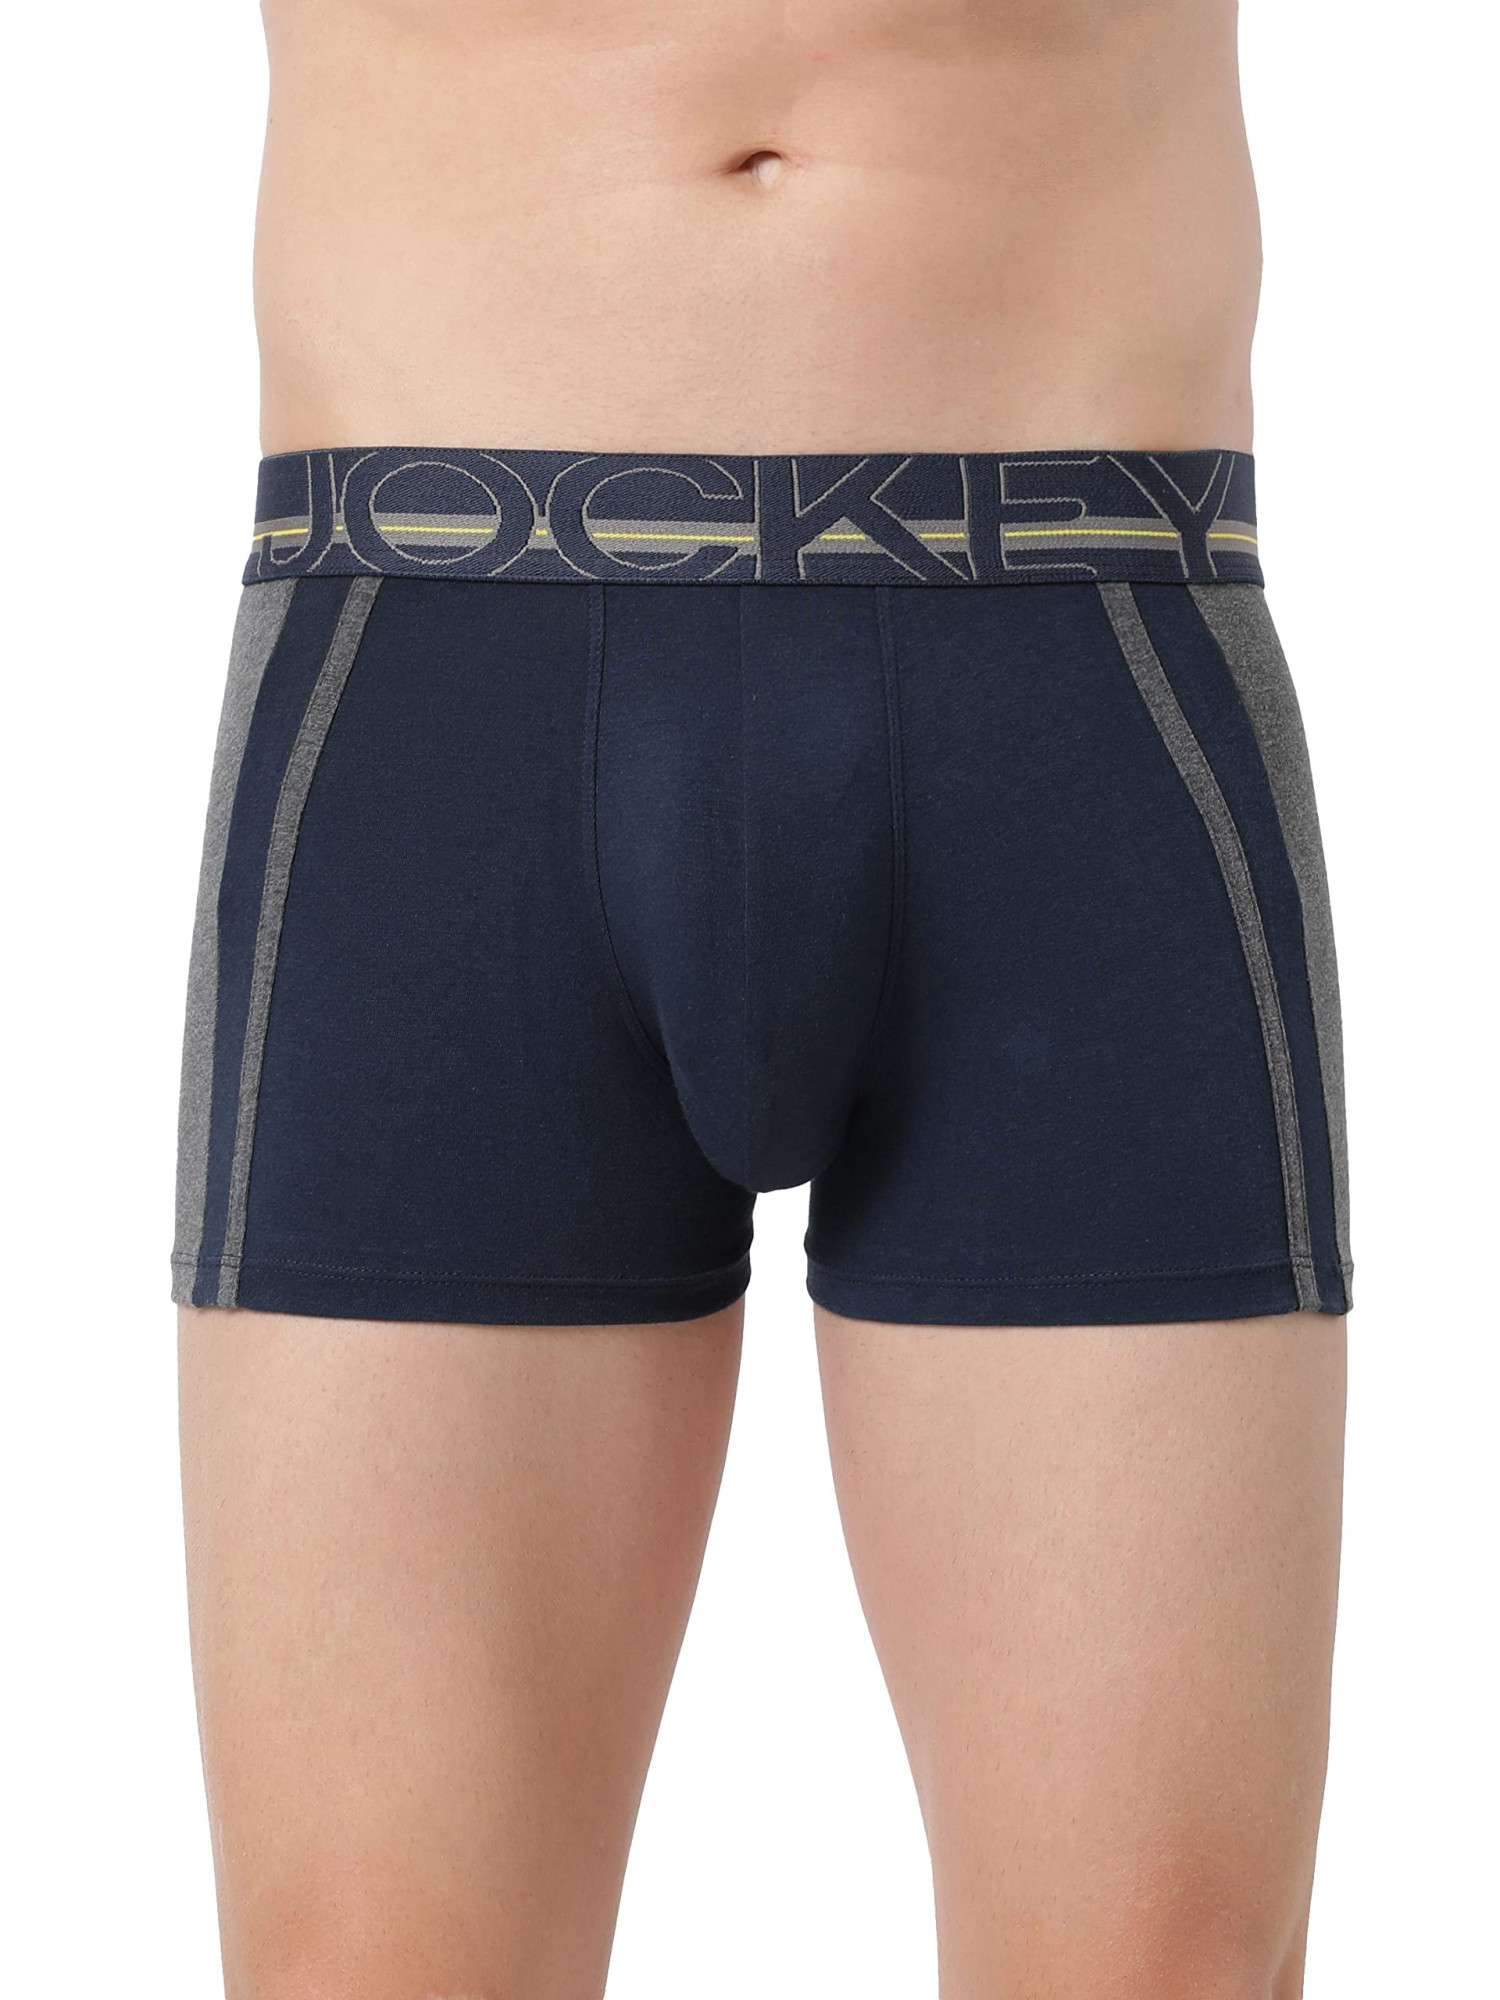 Buy Men's Super Combed Cotton Elastane Stretch Printed Brief with